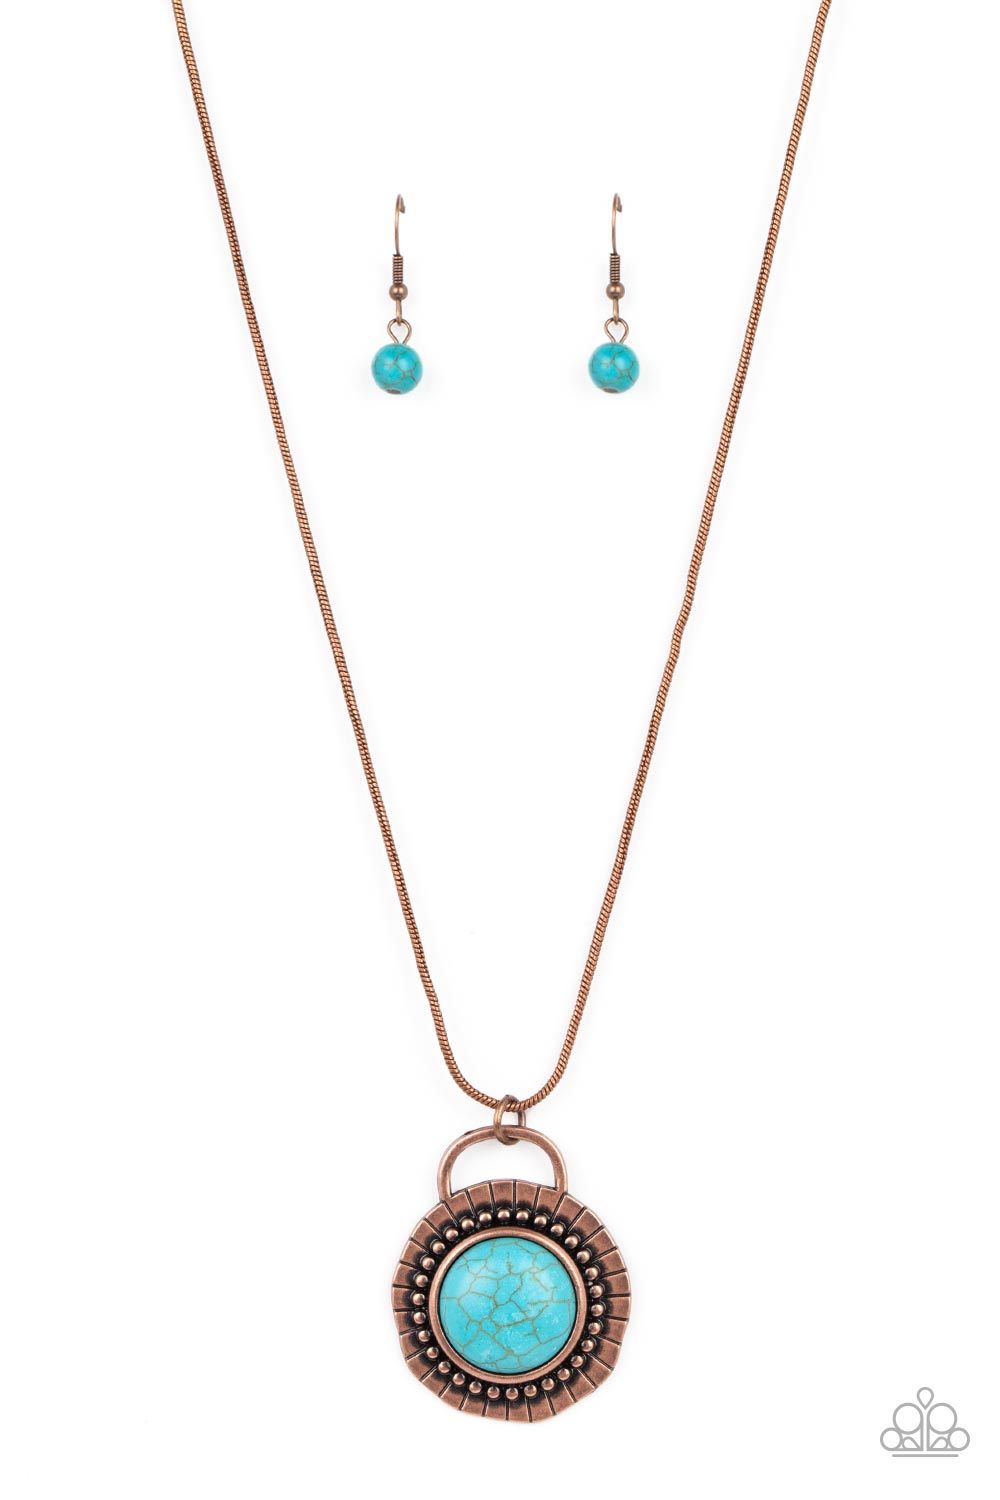 New Age Nomad - Copper and Turquoise Necklace - Paparazzi Accessories Bejeweled Accessories By Kristie